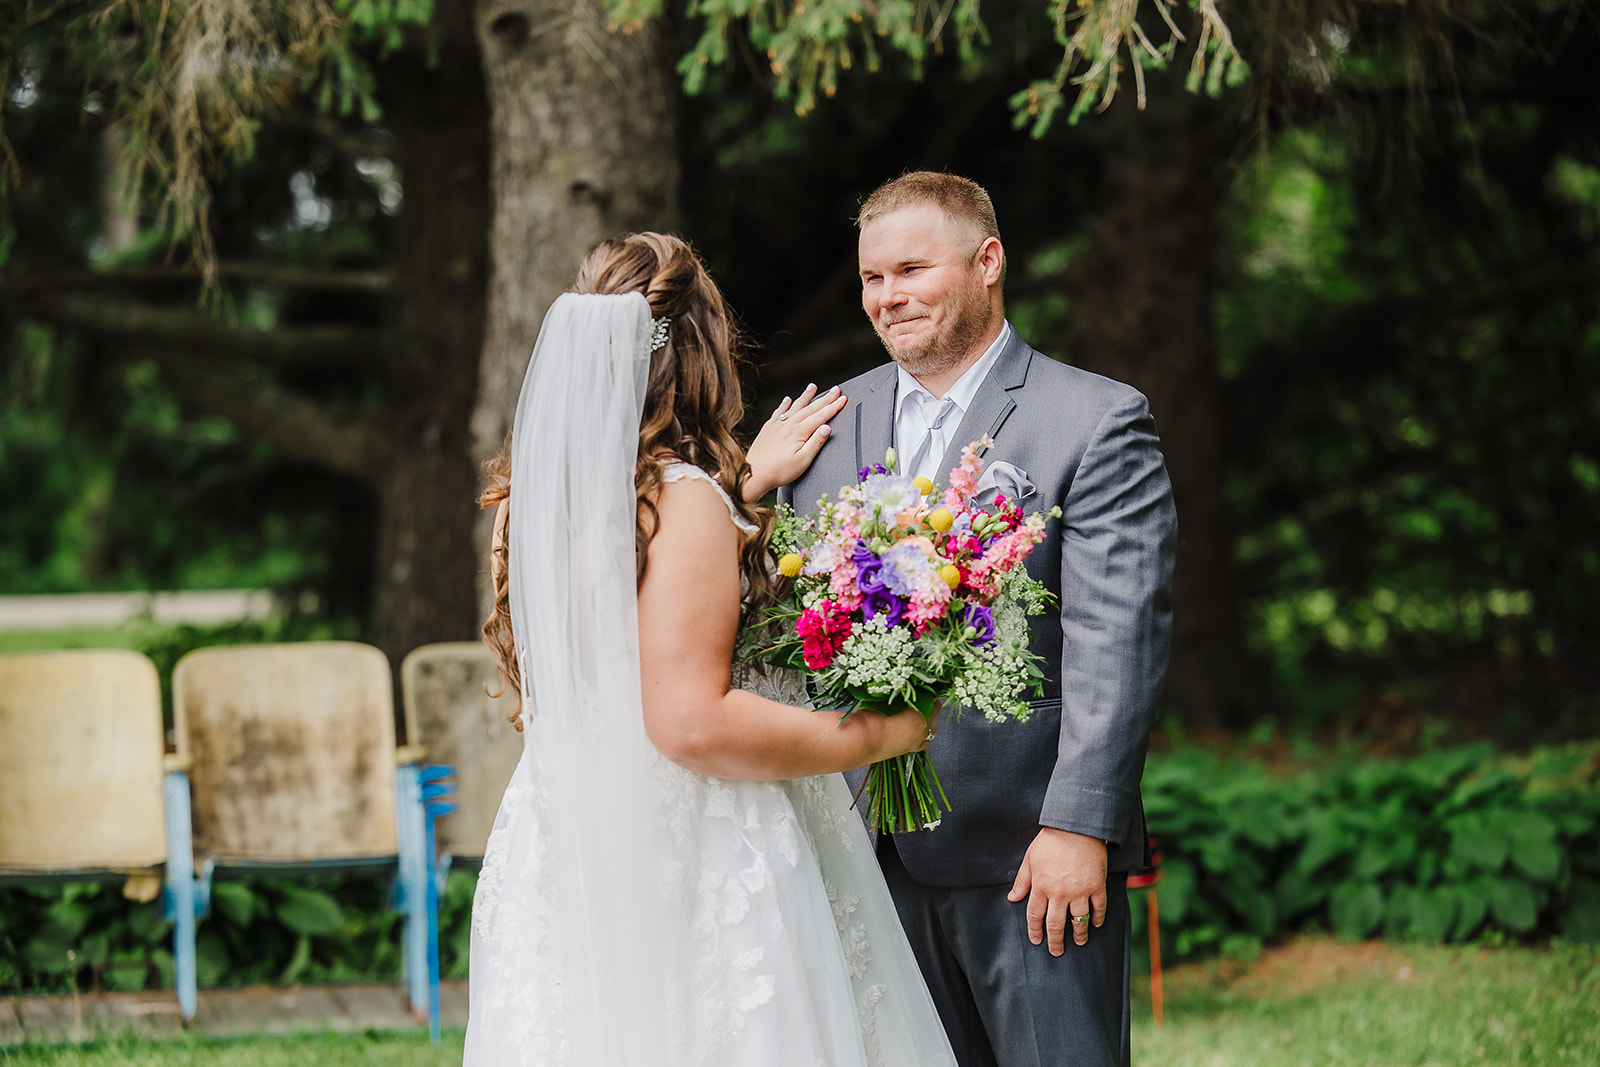 First look photos are full of so much emotion and joy, such as this Wisconsin groom’s first look with his bride. Colorful wedding bouquet First look photos #firstlook #firstlookinspo #wisconsinwedding #wisconsinweddingphotographer #brideandgroomphotos